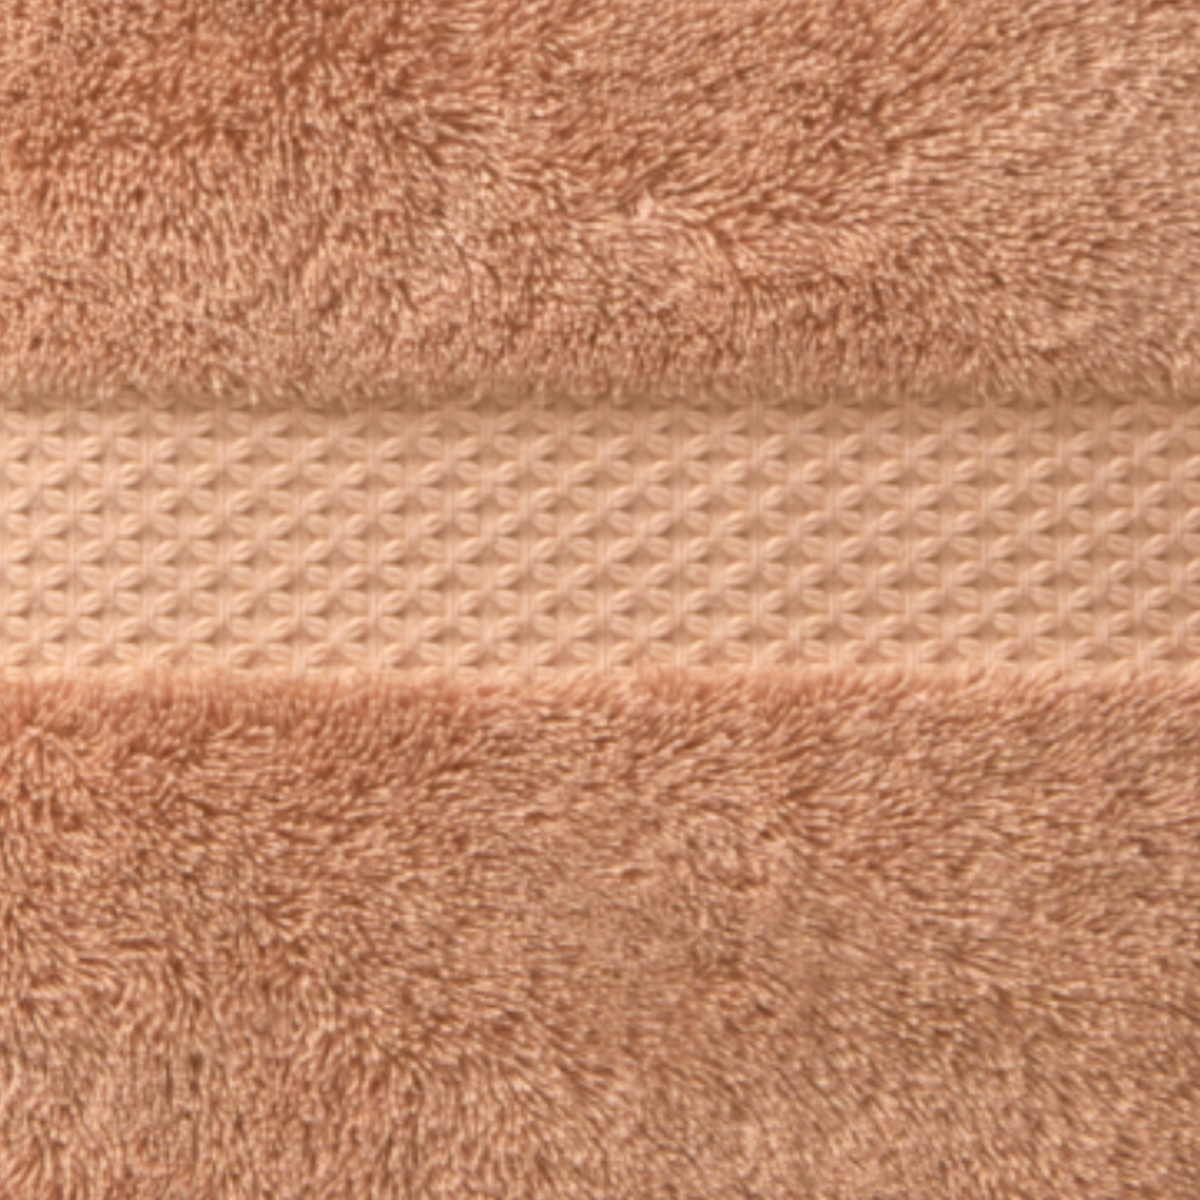 Swatch Sample of Yves Delorme Etoile Bath Towels and Mats in Sienna Color